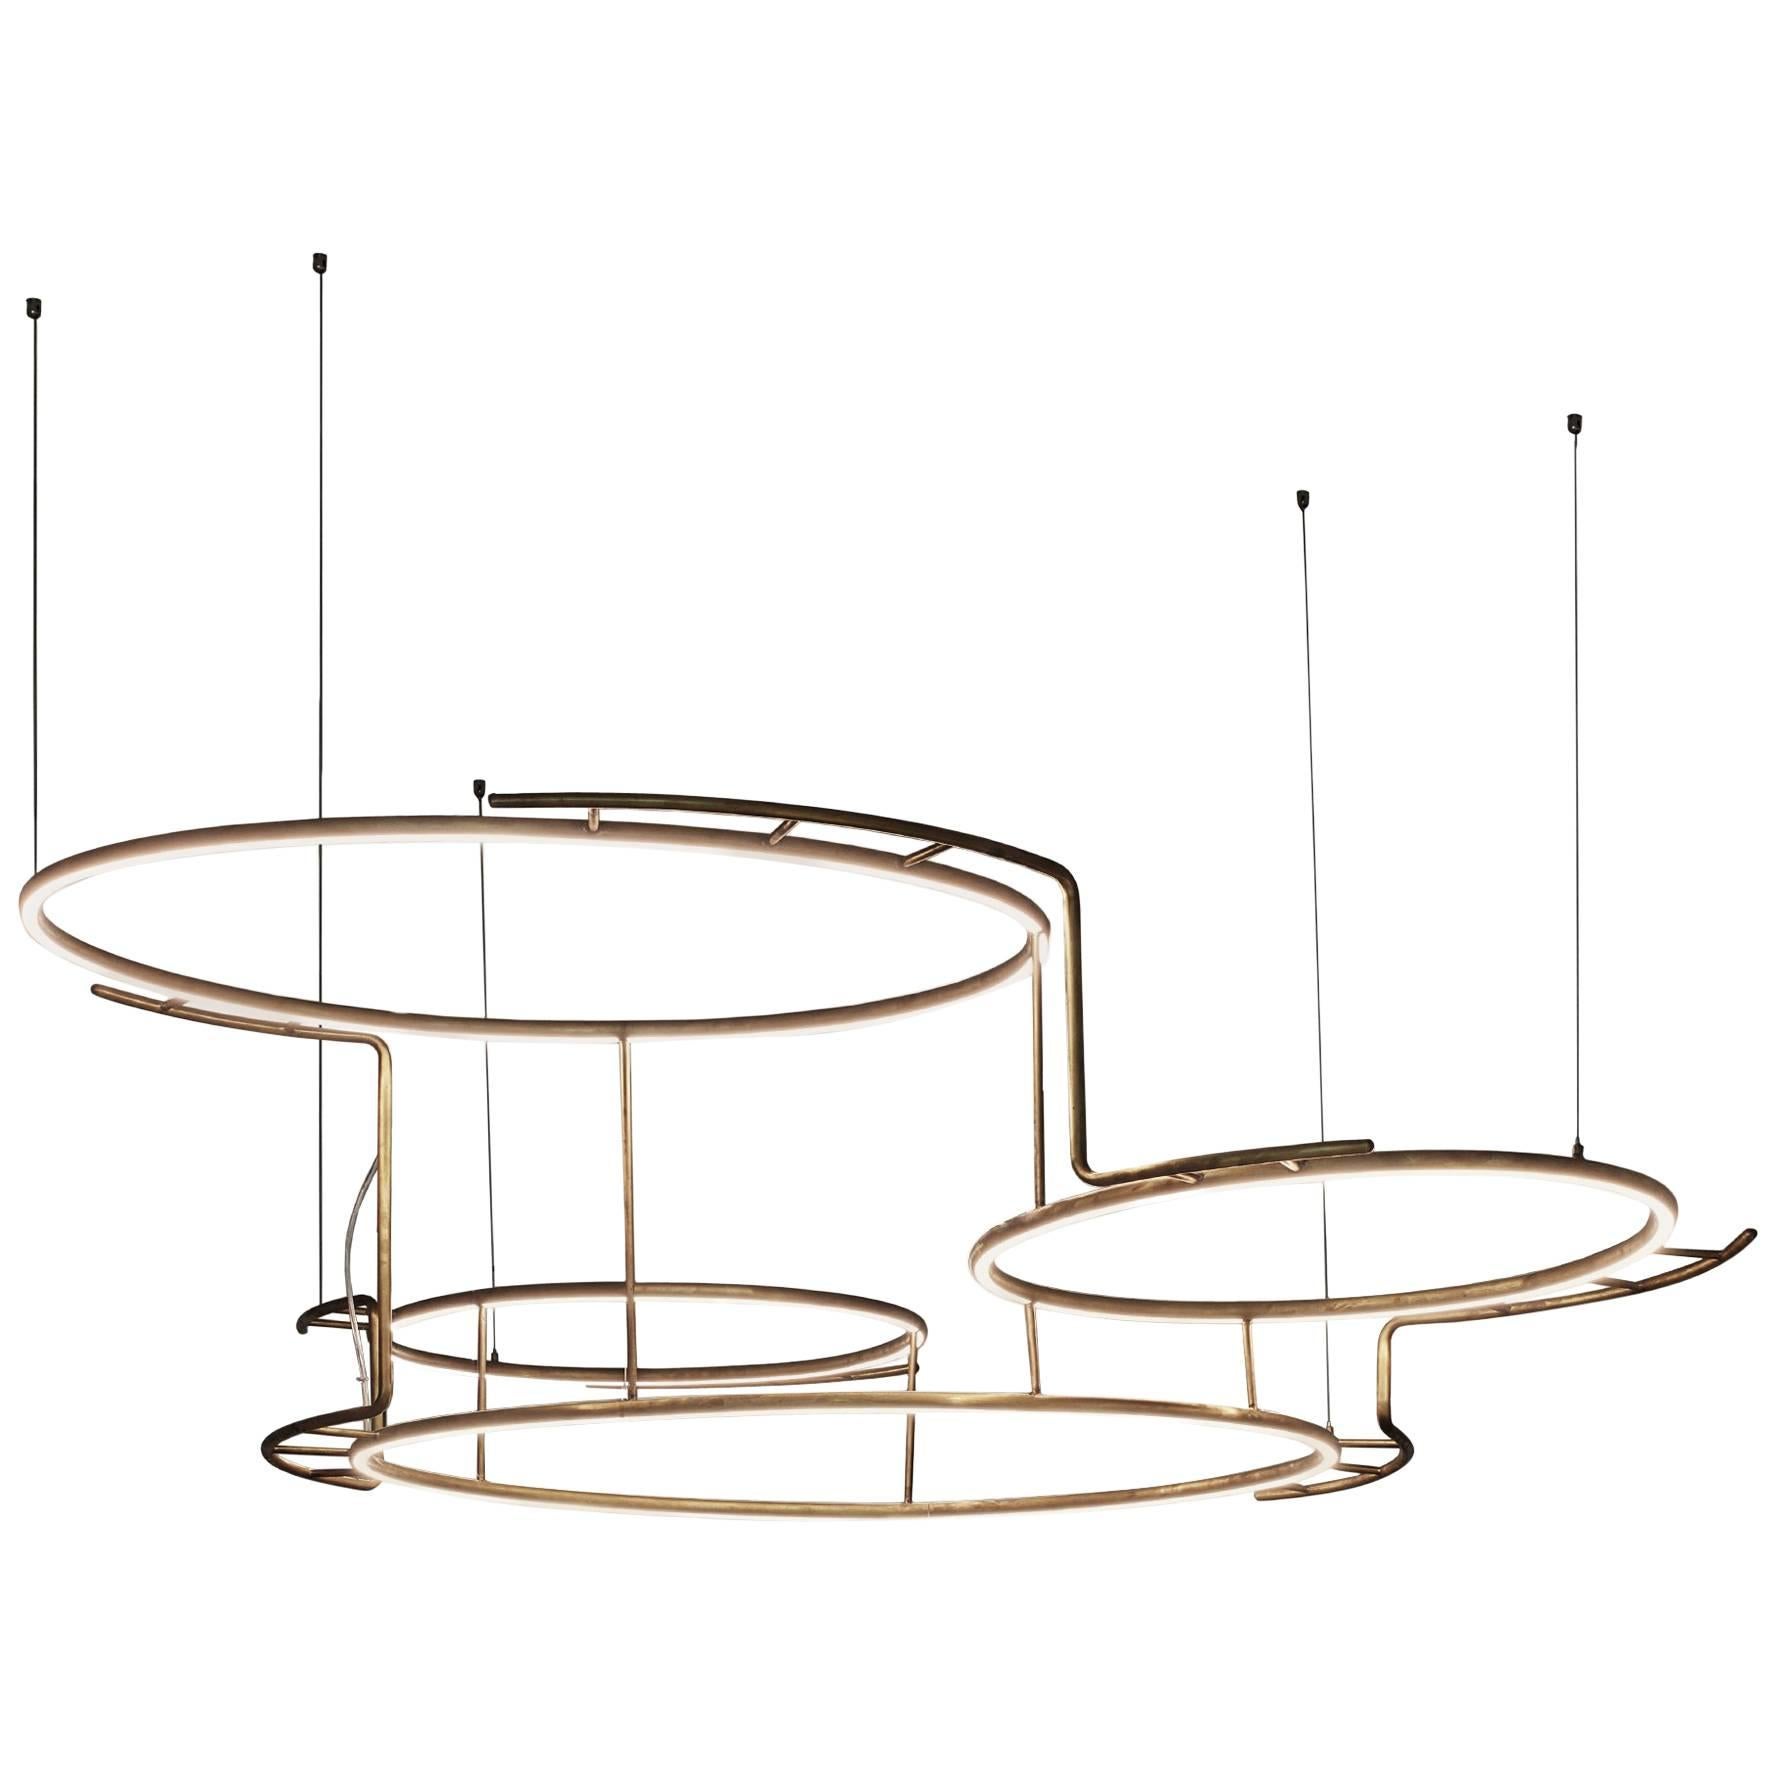 Pendant Lamp in Natural Brass and Led Incorporated, French Contemporary Lighting For Sale